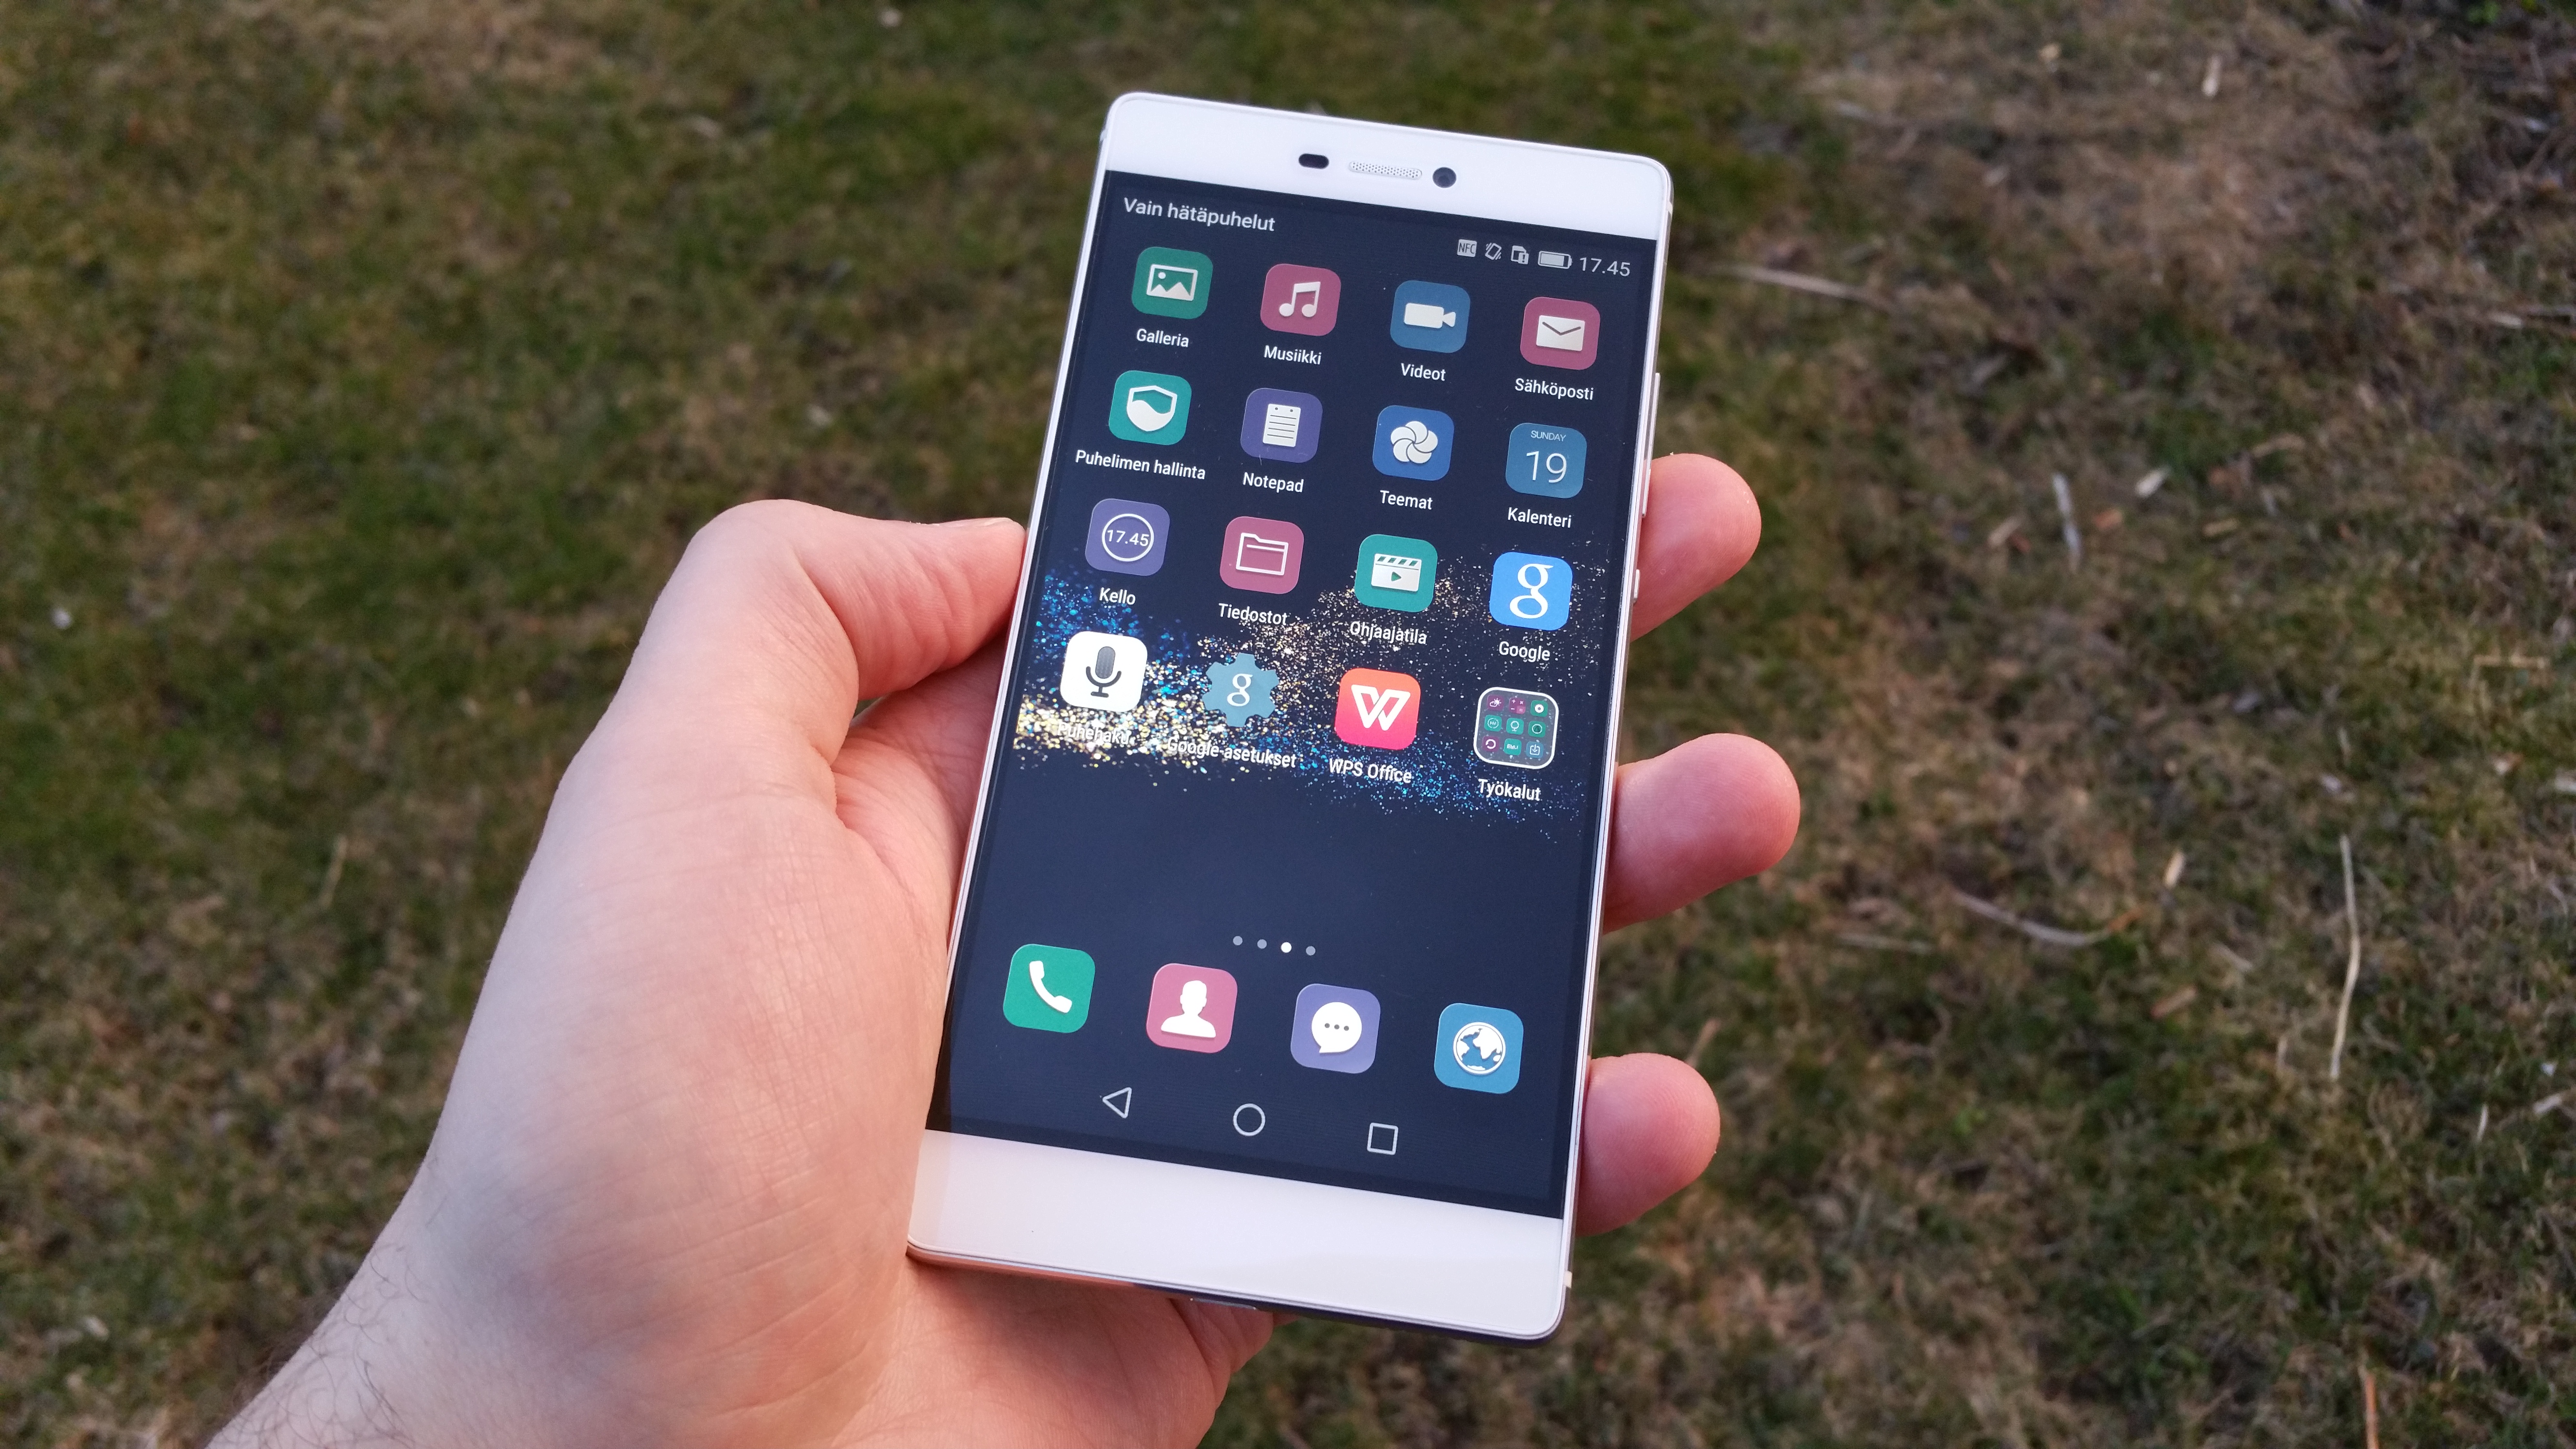 Huawei just launched the insanely big P8 Max smartphone | TechRadar